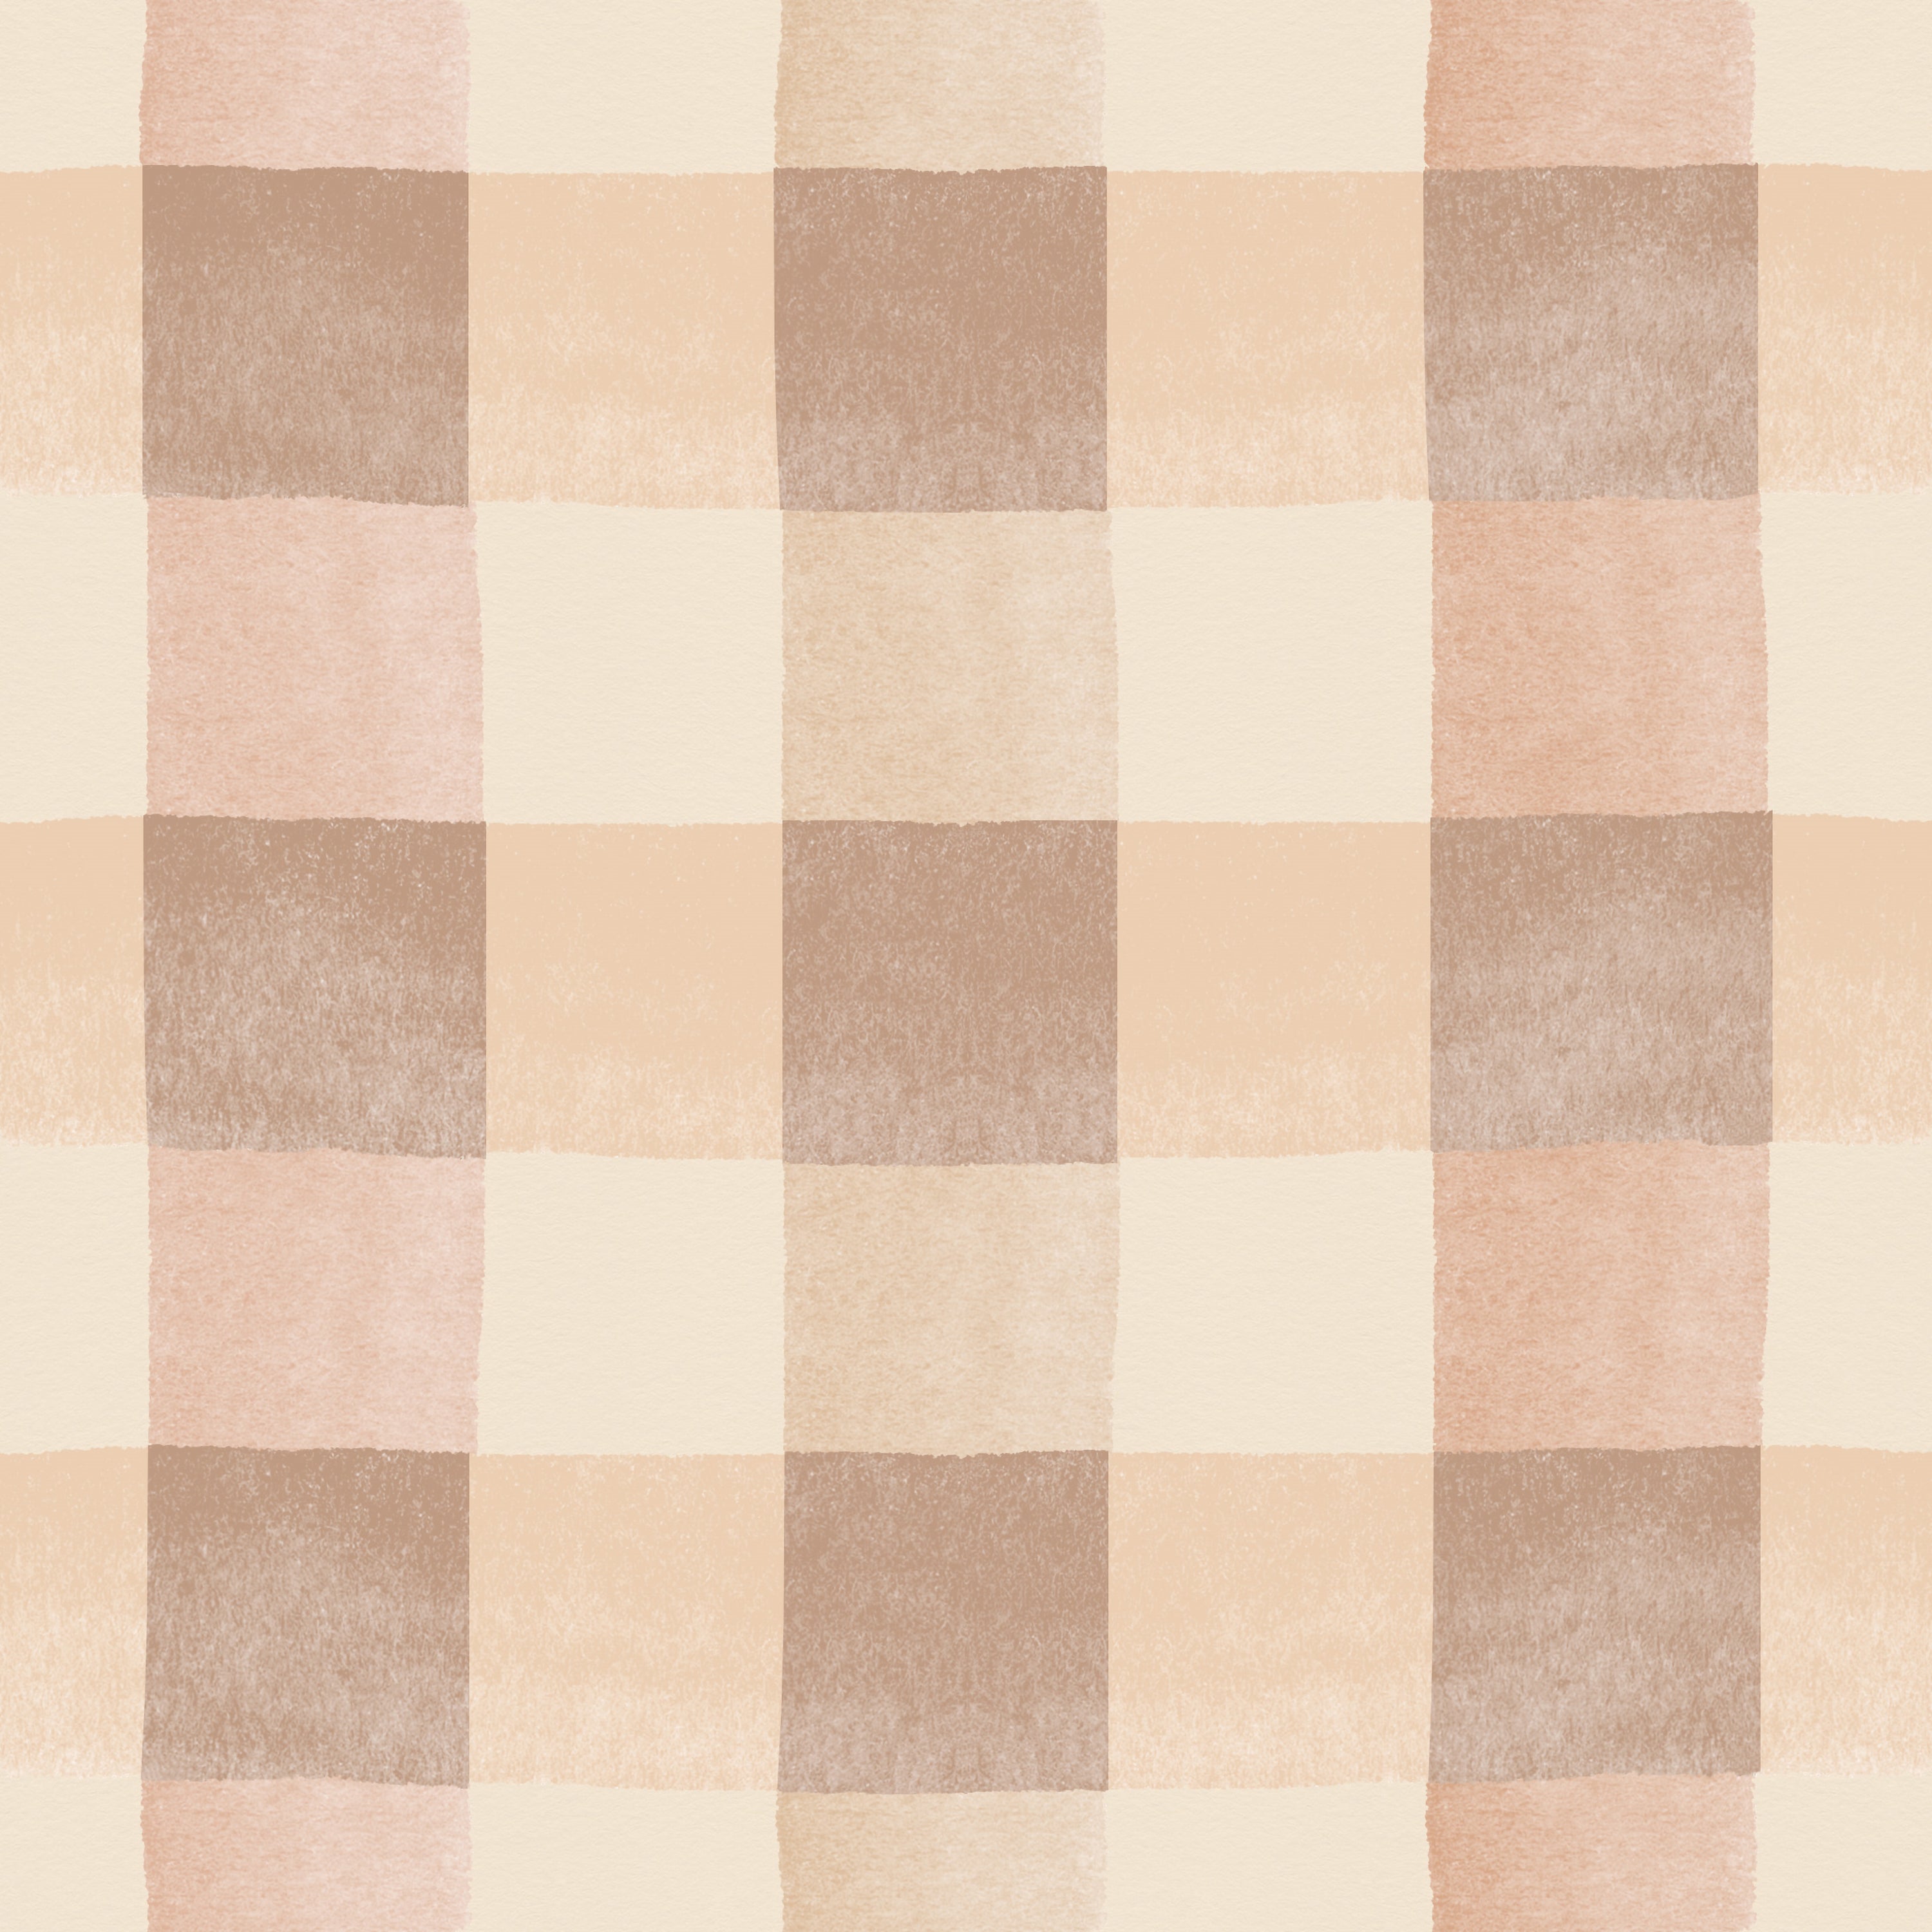 Camille Wallpaper displaying a soft checkered pattern in pastel shades of beige and cream. Each square alternates in color and texture, adding a subtle yet sophisticated visual interest to the design.